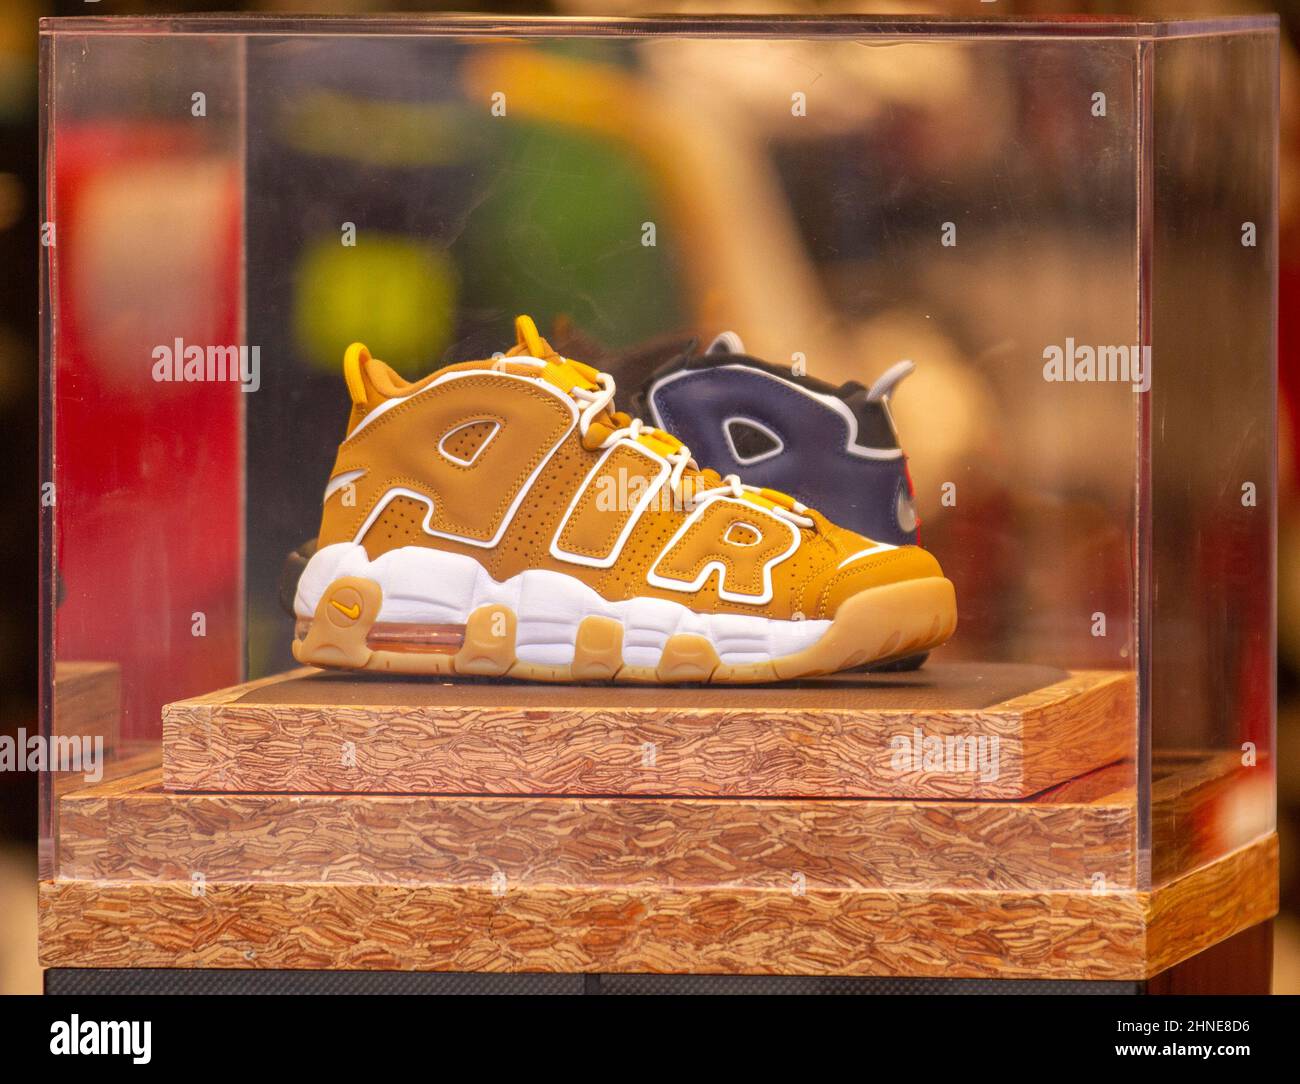 Nike Air Max High Resolution Stock Photography and Images - Alamy